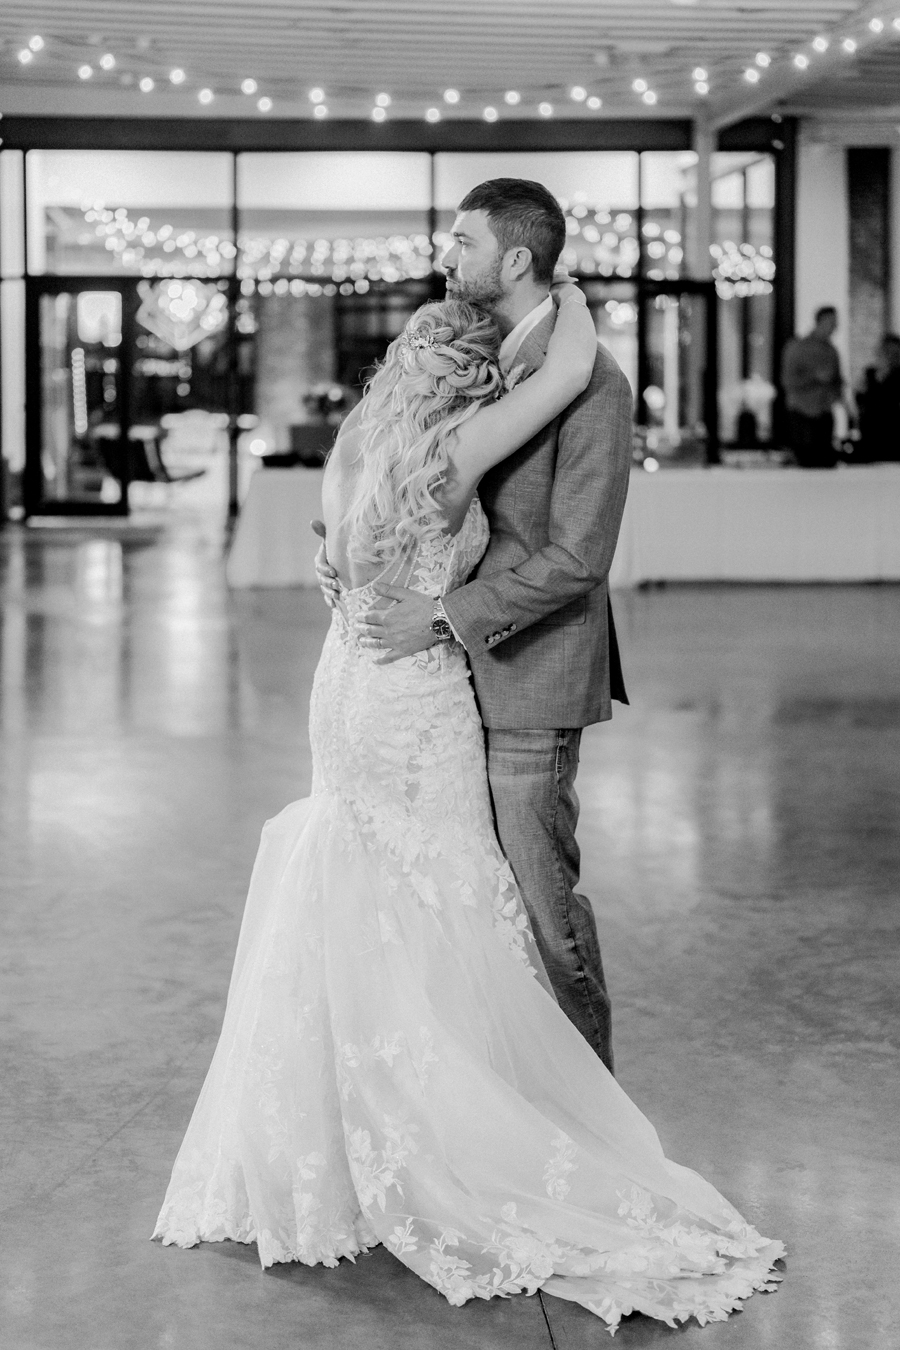 A bride and groom dance at their wedding at the Atrium on Tenth wedding in Columbia, Missouri by Love Tree Studios.